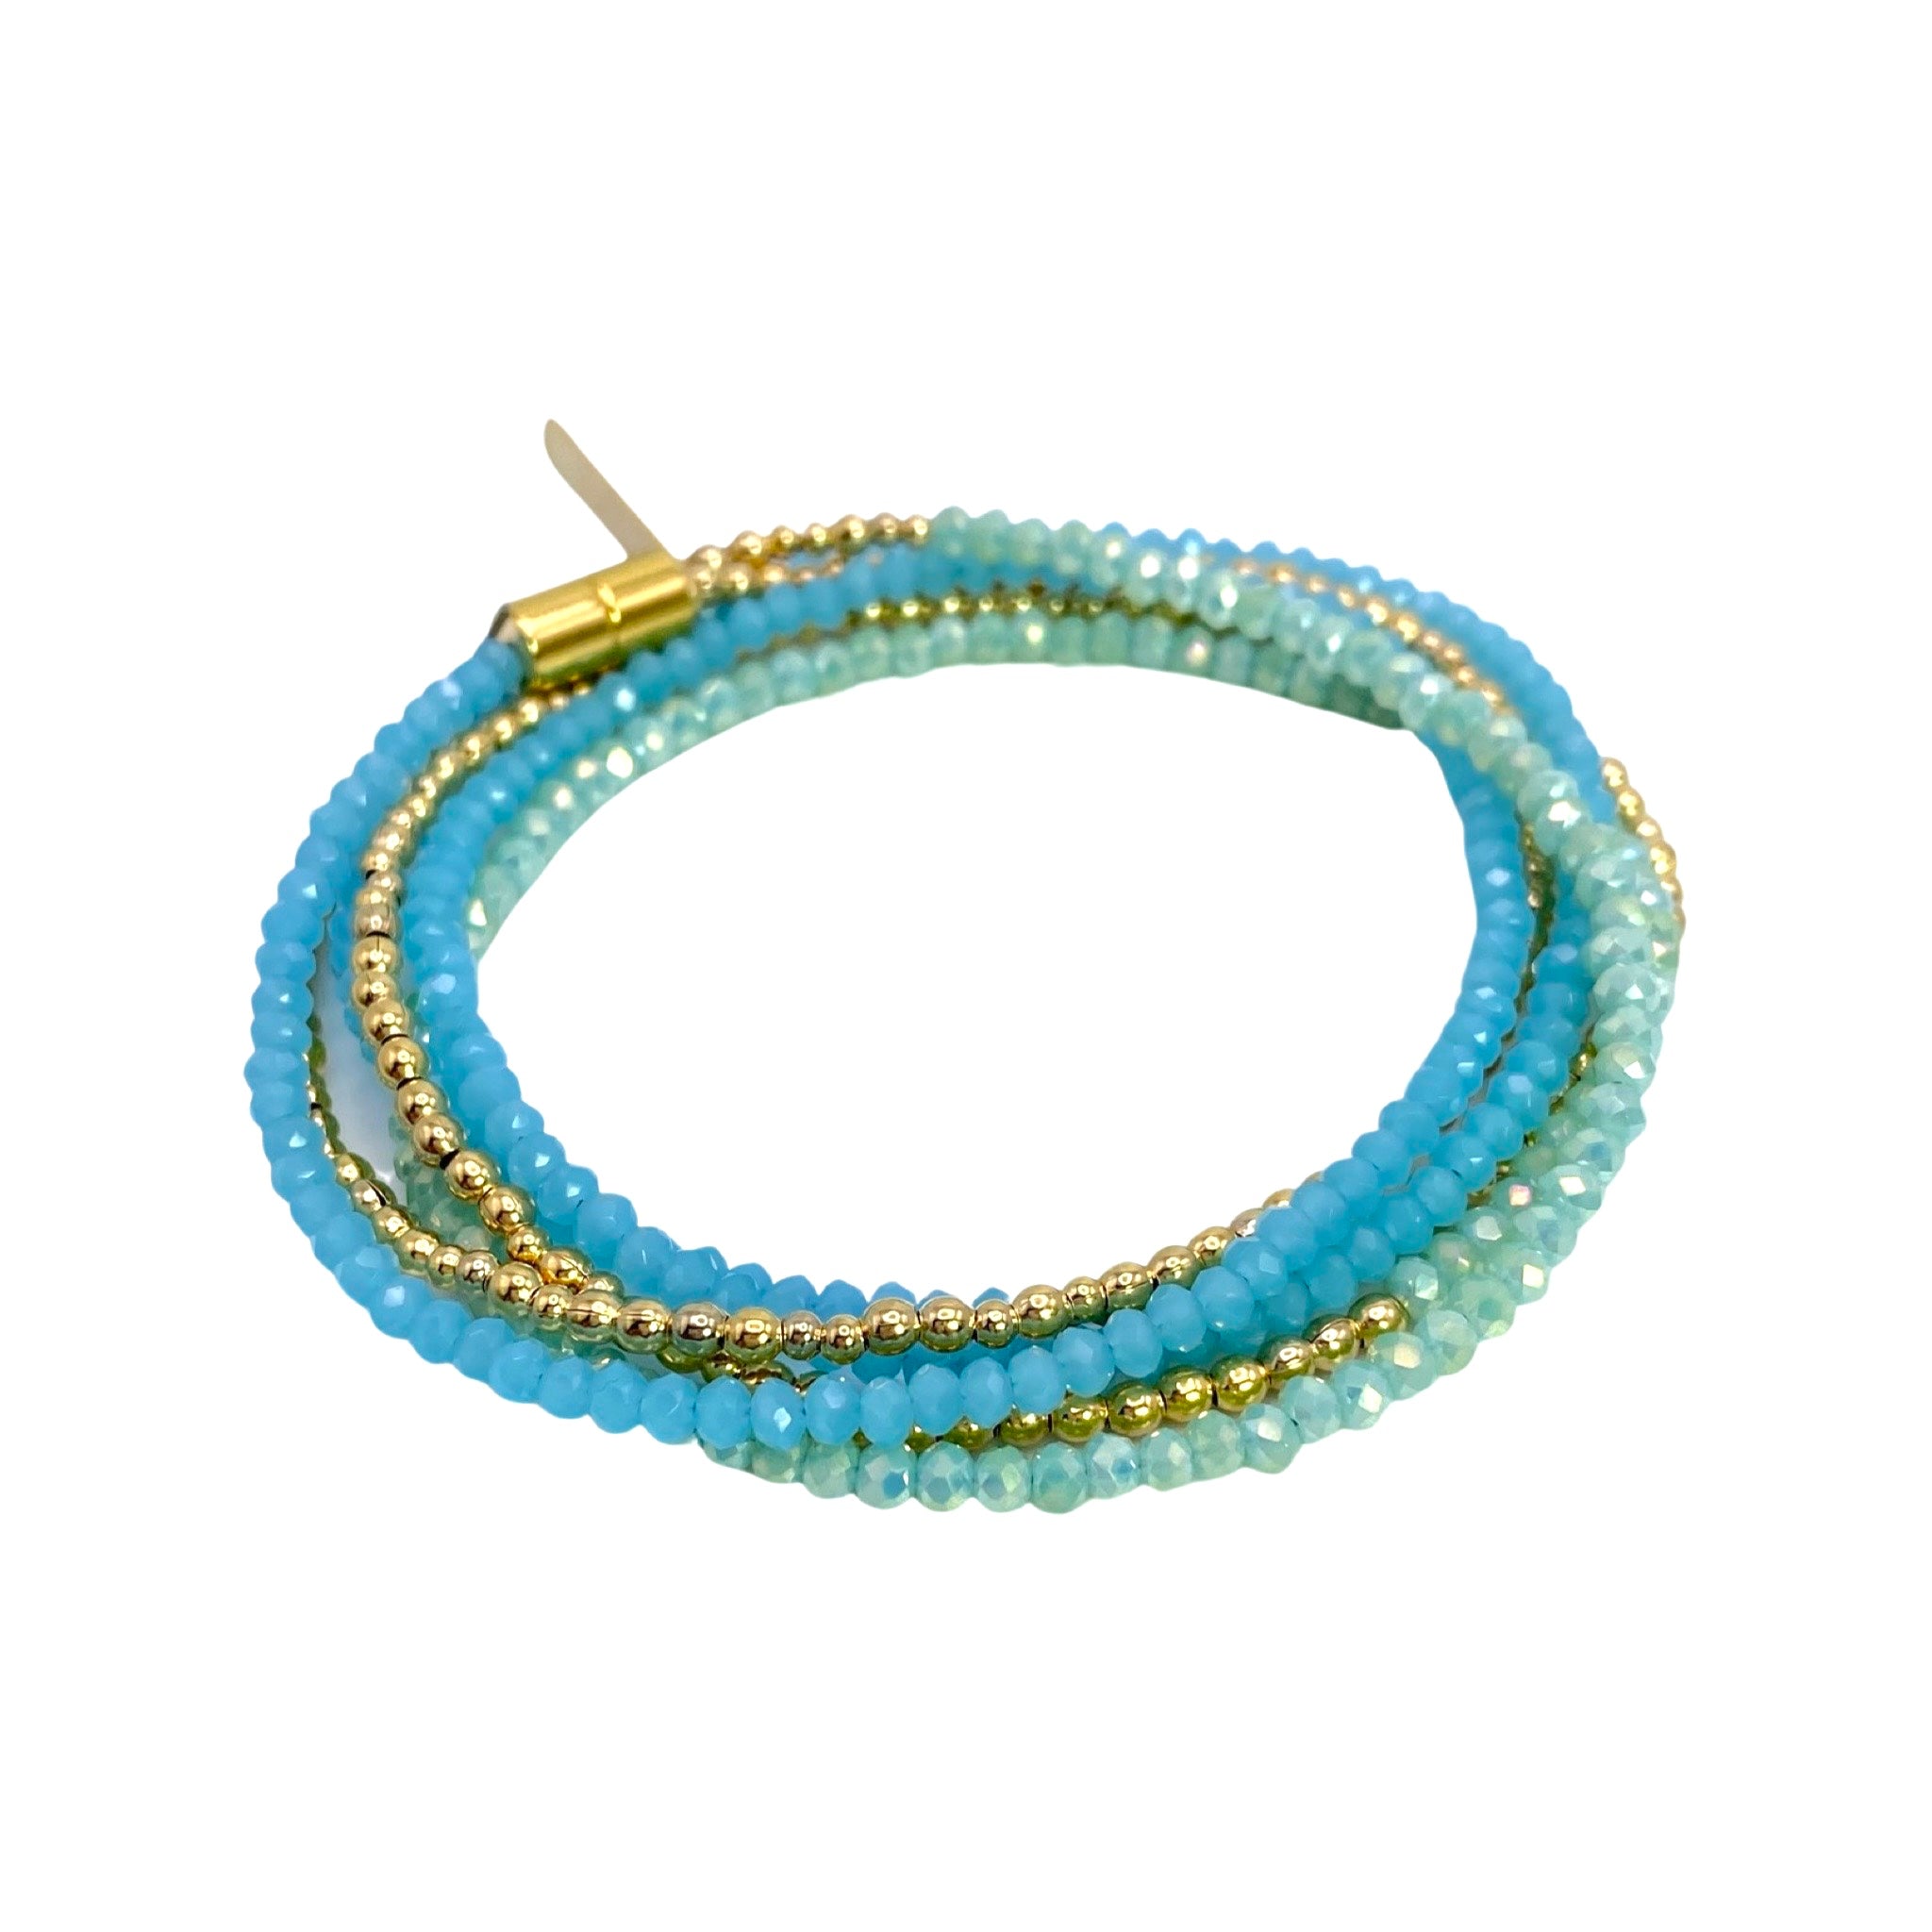 Millianna Single Strand Wrap - Ocean Ombre - Available at Shaylula Jewlery & Gifts in Tarrytown, NY and online. The perfect, versatile, go-to staple in your jewelry wardrobe! With 5 ways to wear it, you're going to want one in every color! Hand-beaded microcut crystal strand that can be a necklace or wrap bracelet. Talk about making a statement! • Cut crystal • 43" L • Magnetic clasp